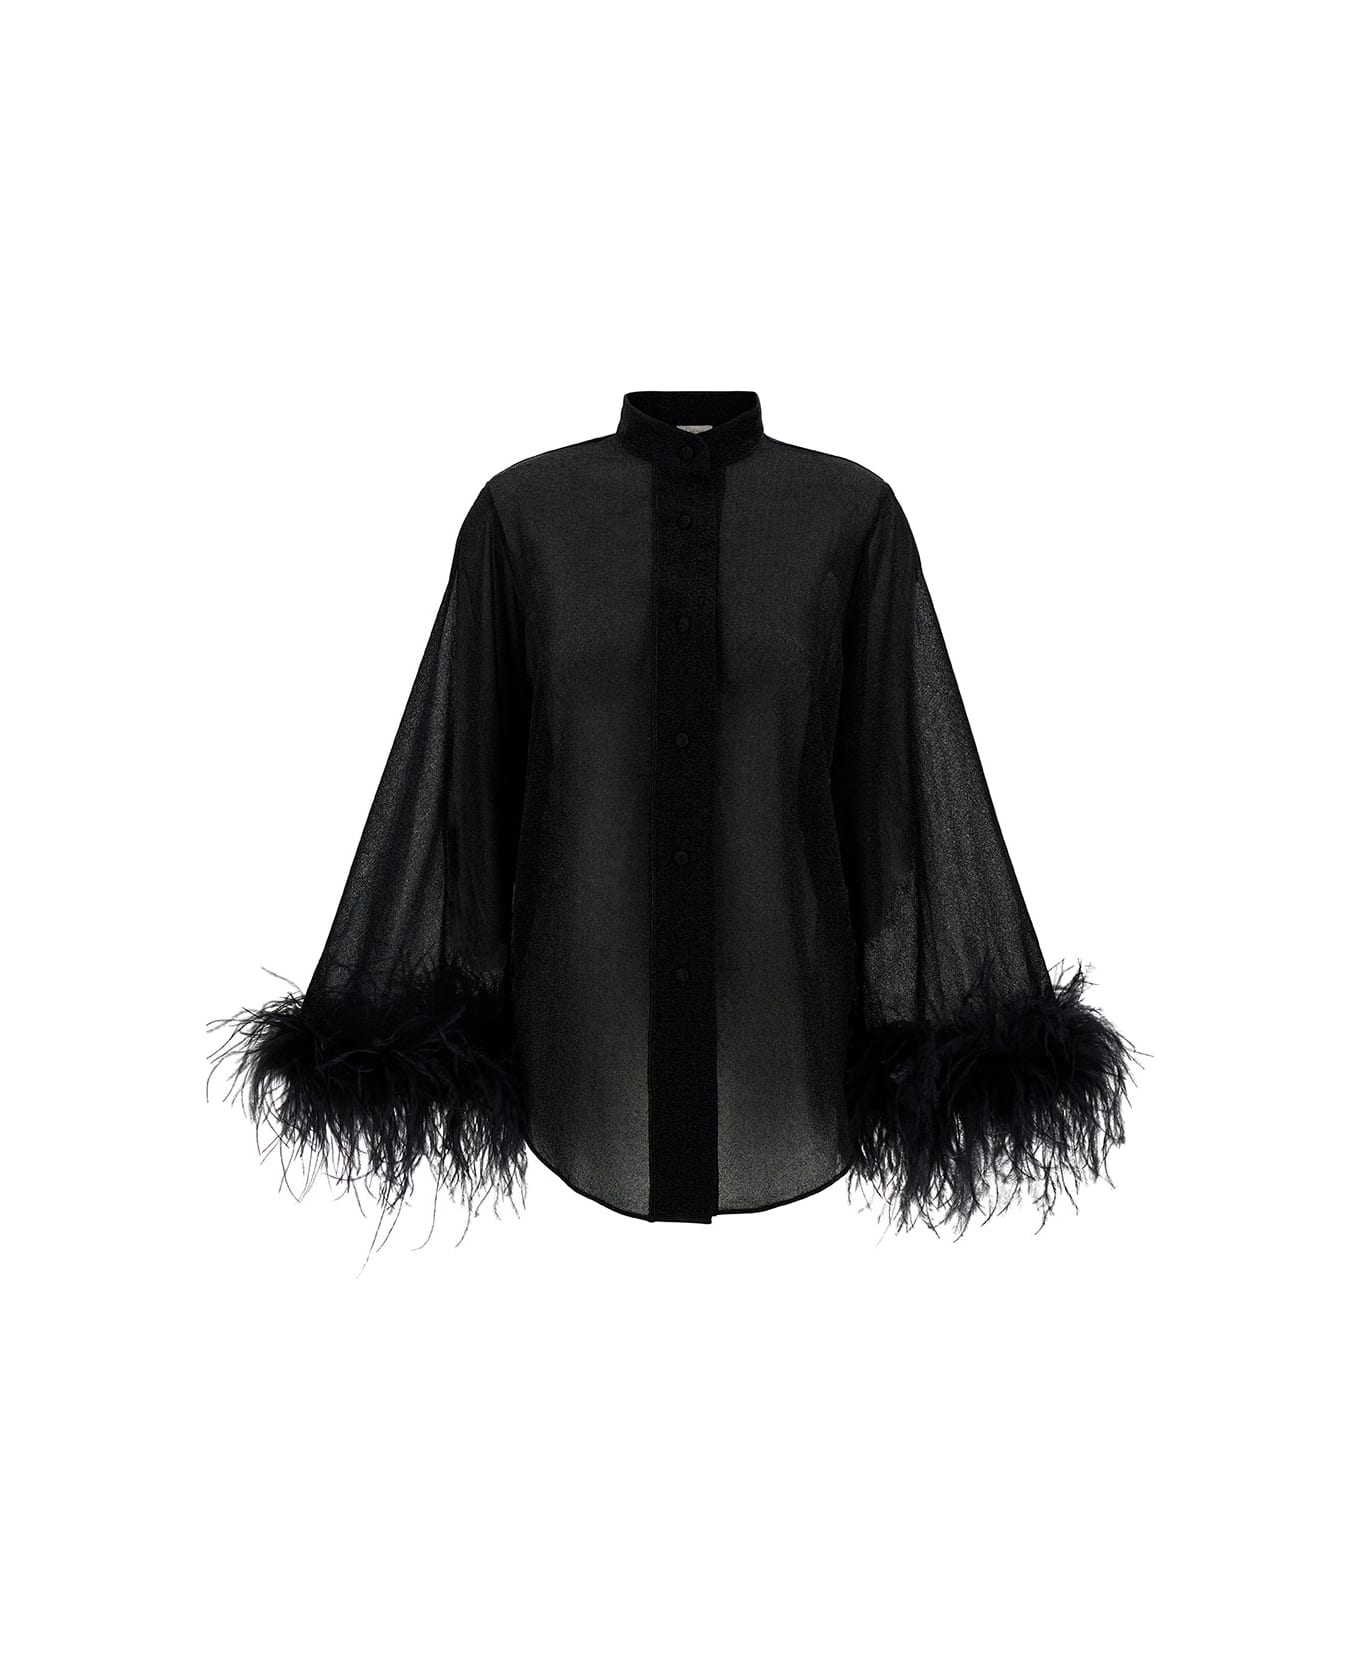 Oseree 'lumière' Black Relaxed Shirt With Tonal Feathers In Polyamide Blend Woman - Black ブラウス